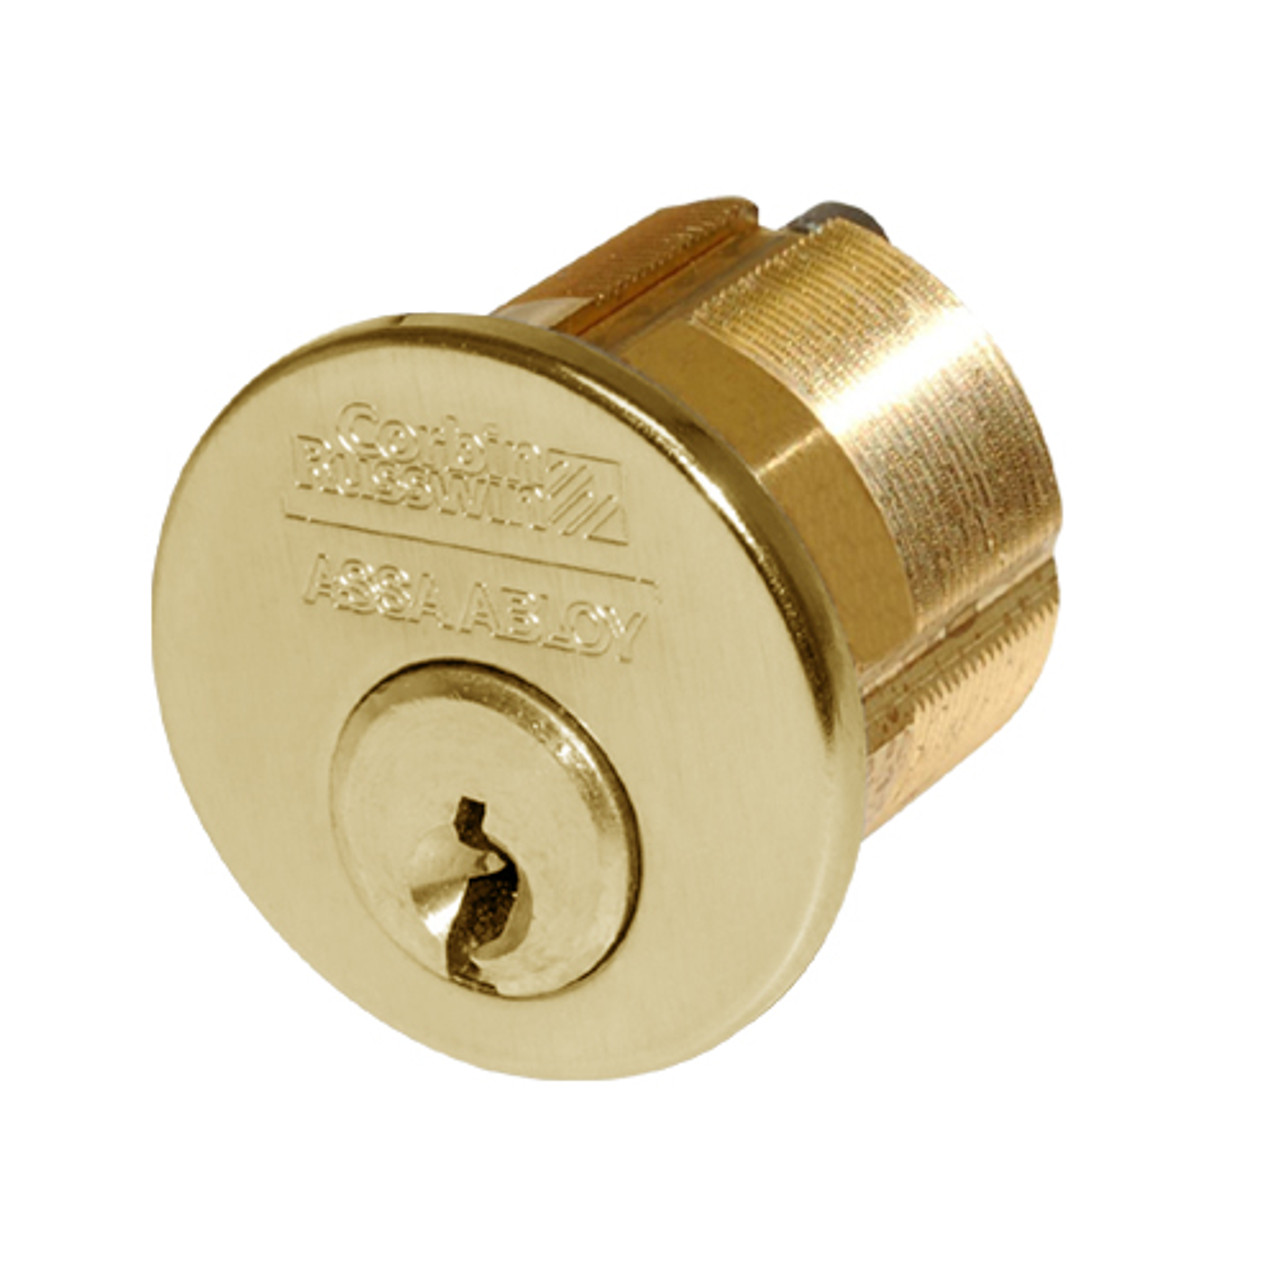 CR1000-138-A06-6-L1-605 Corbin Conventional Mortise Cylinder for Mortise Lock and DL3000 Deadlocks with Schlage L9000 Cam in Bright Brass Finish